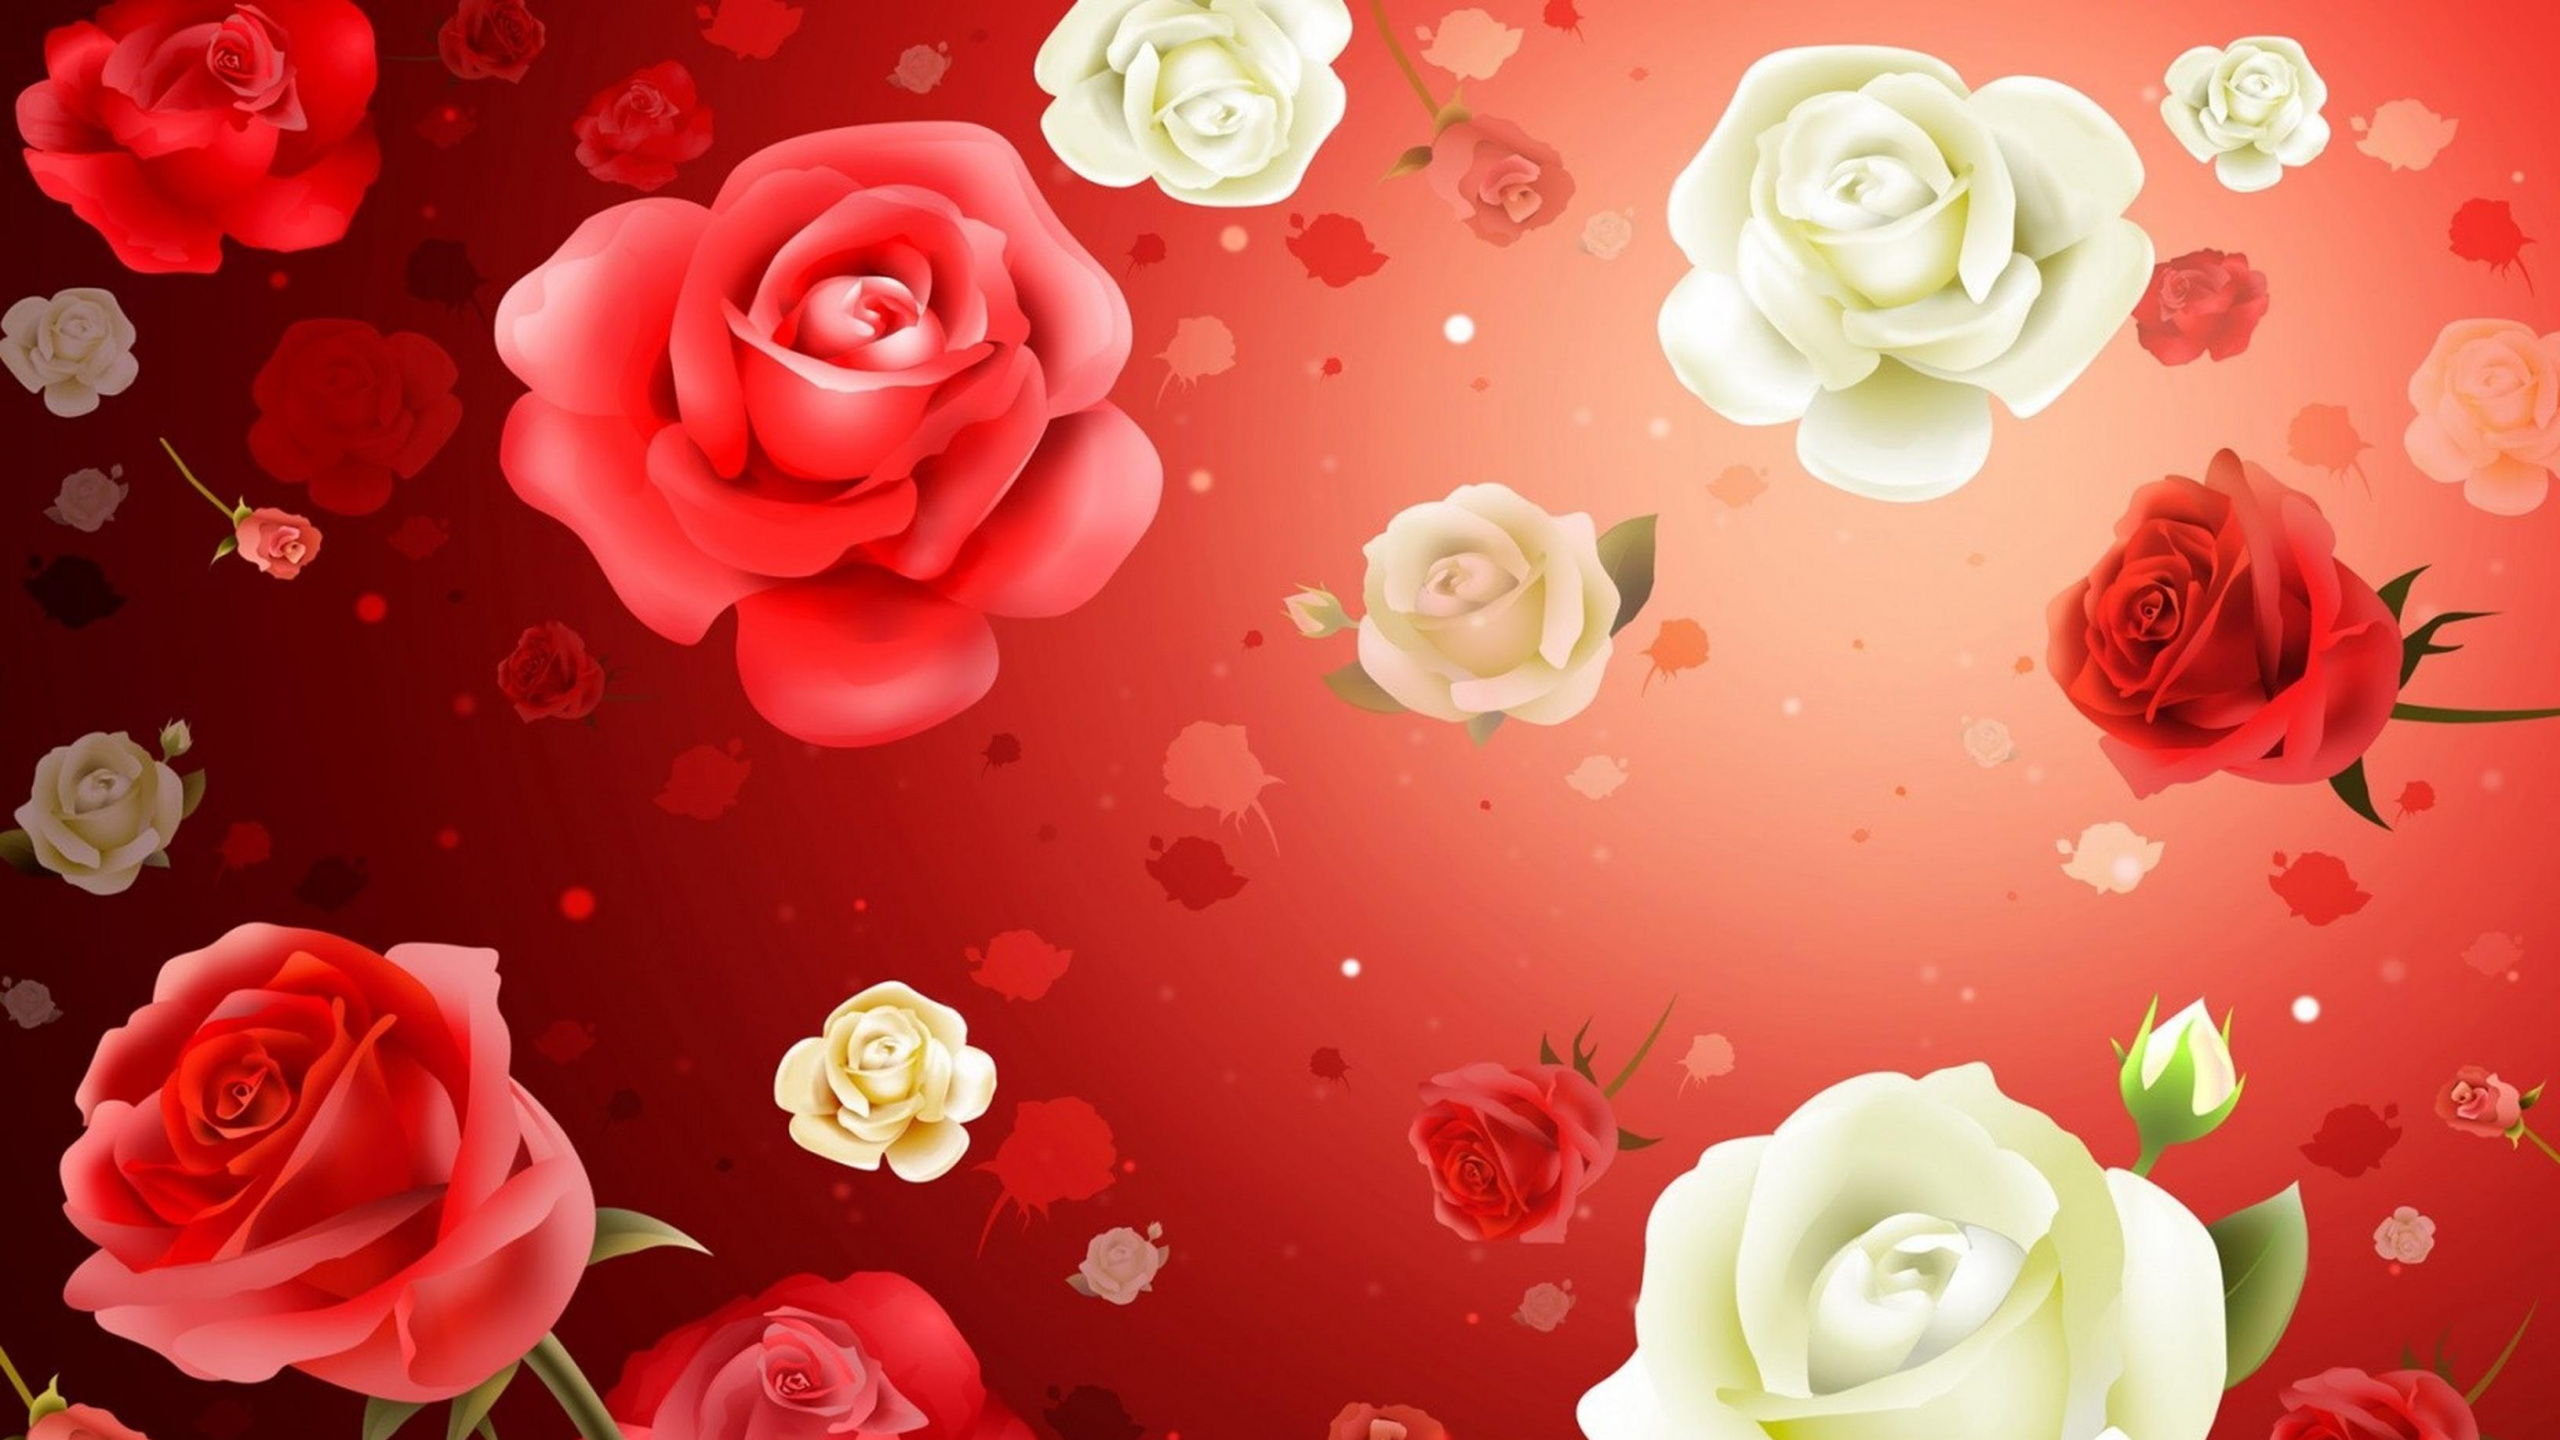 White and Pink Roses on Red Surface. Wallpaper in 2560x1440 Resolution